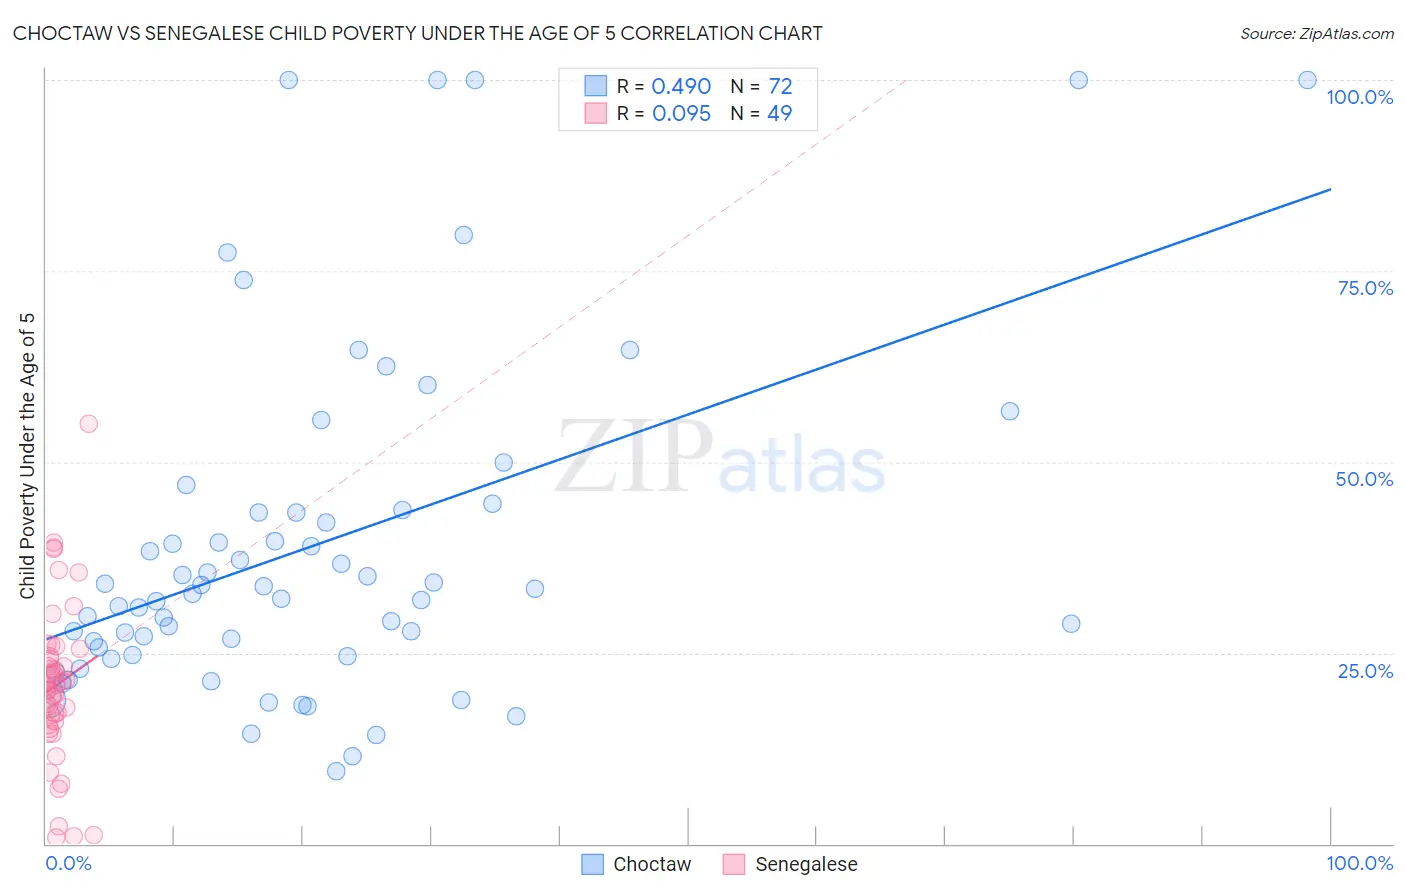 Choctaw vs Senegalese Child Poverty Under the Age of 5